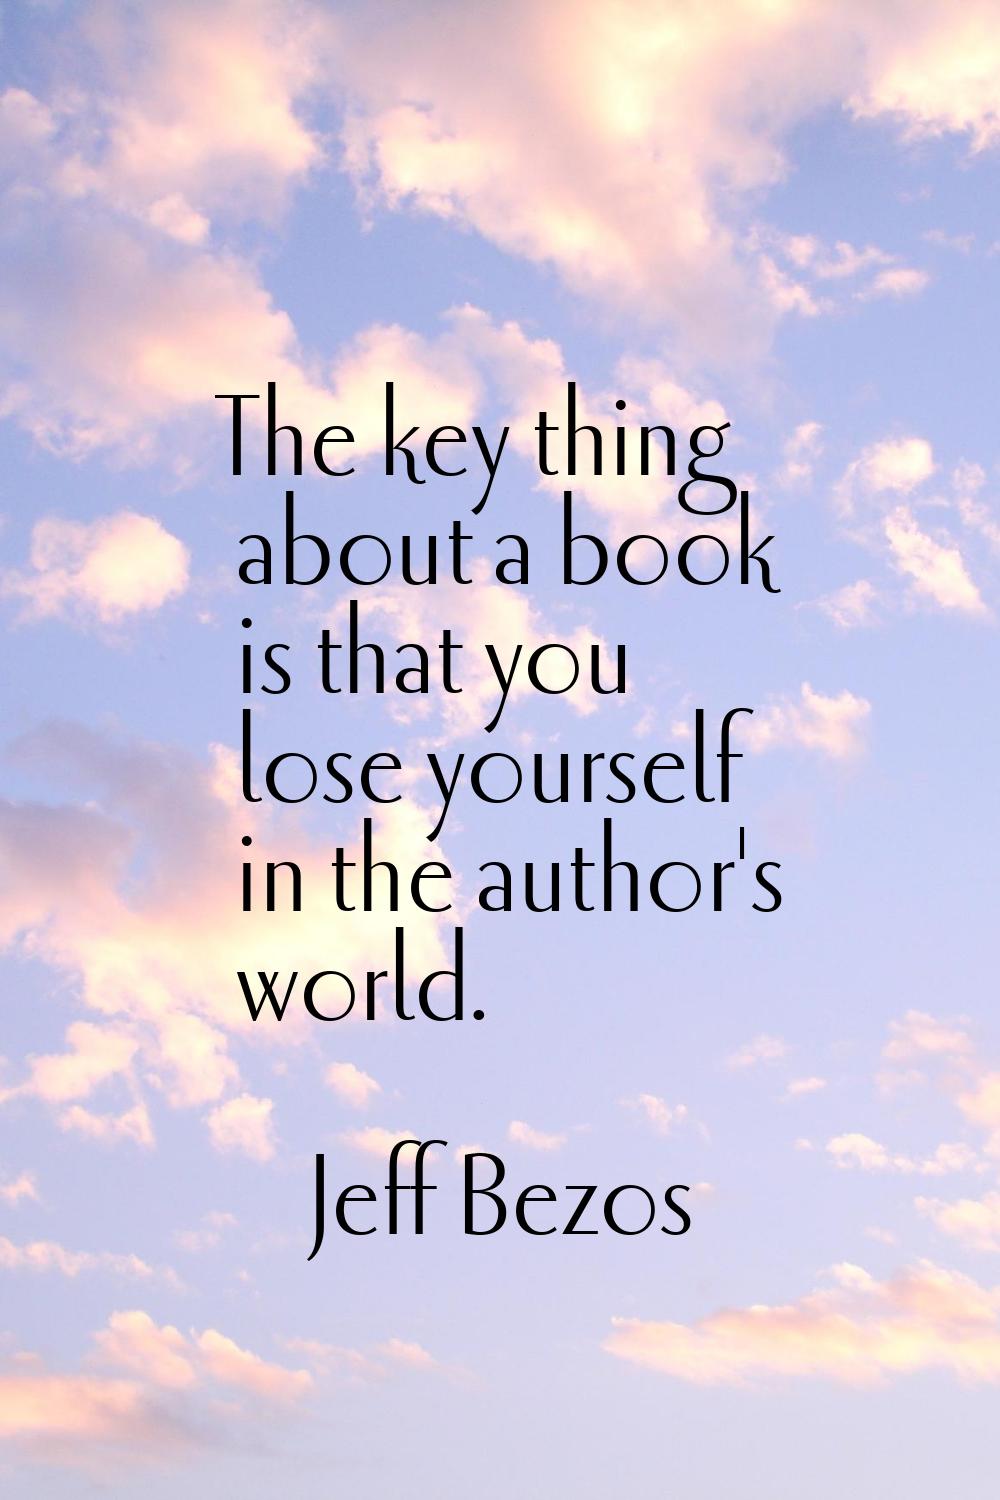 The key thing about a book is that you lose yourself in the author's world.